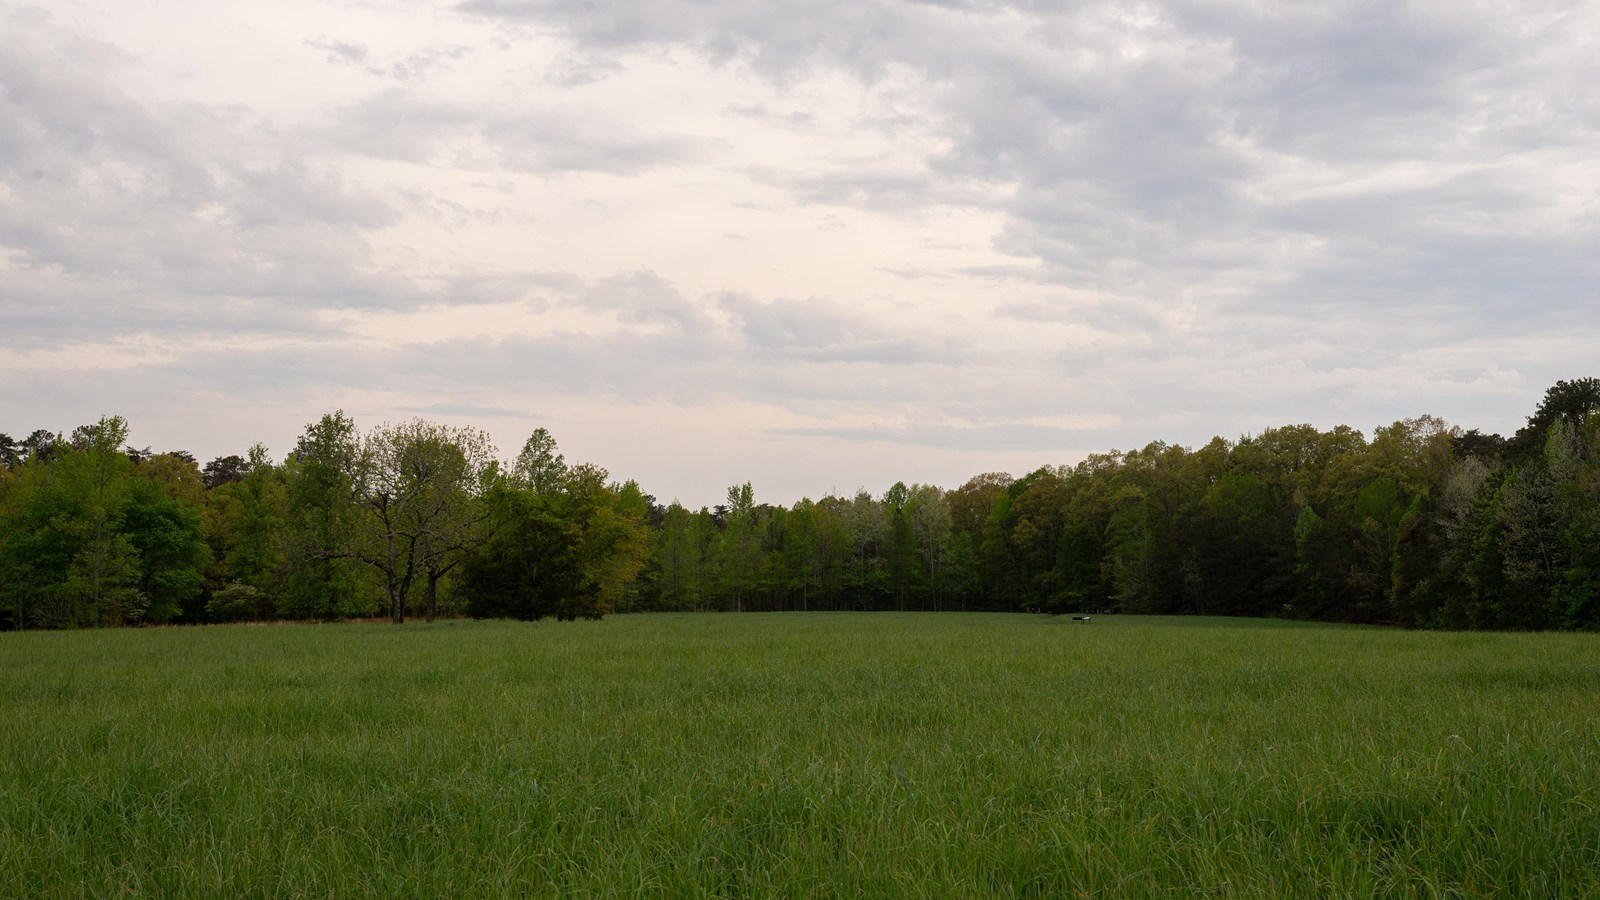 A grassy field with trees in the distance.